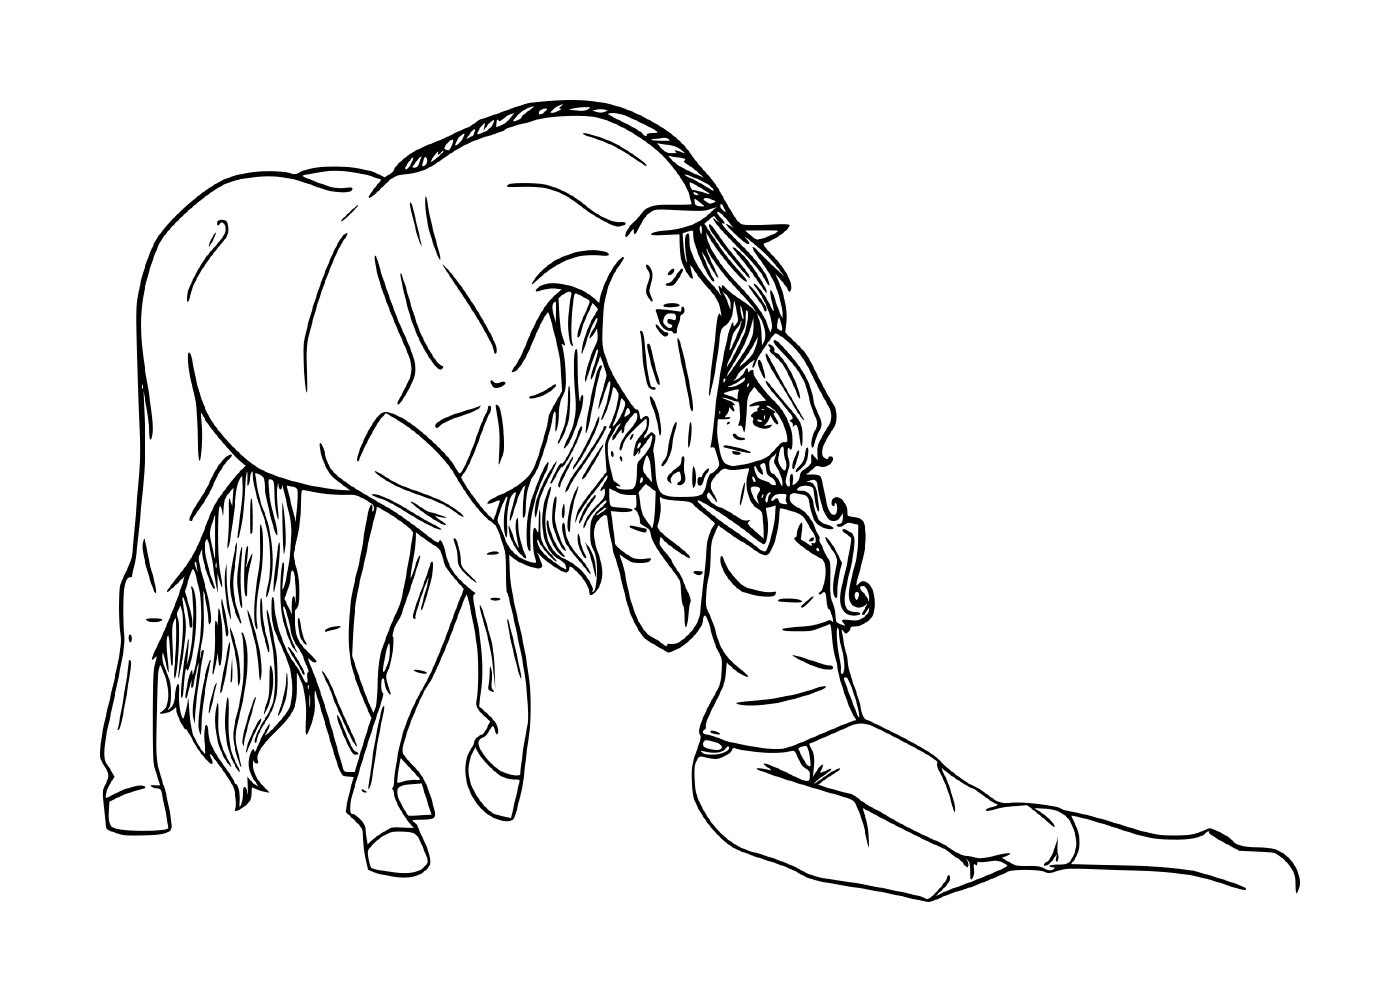  Young girl sharing a special connection with her horse 